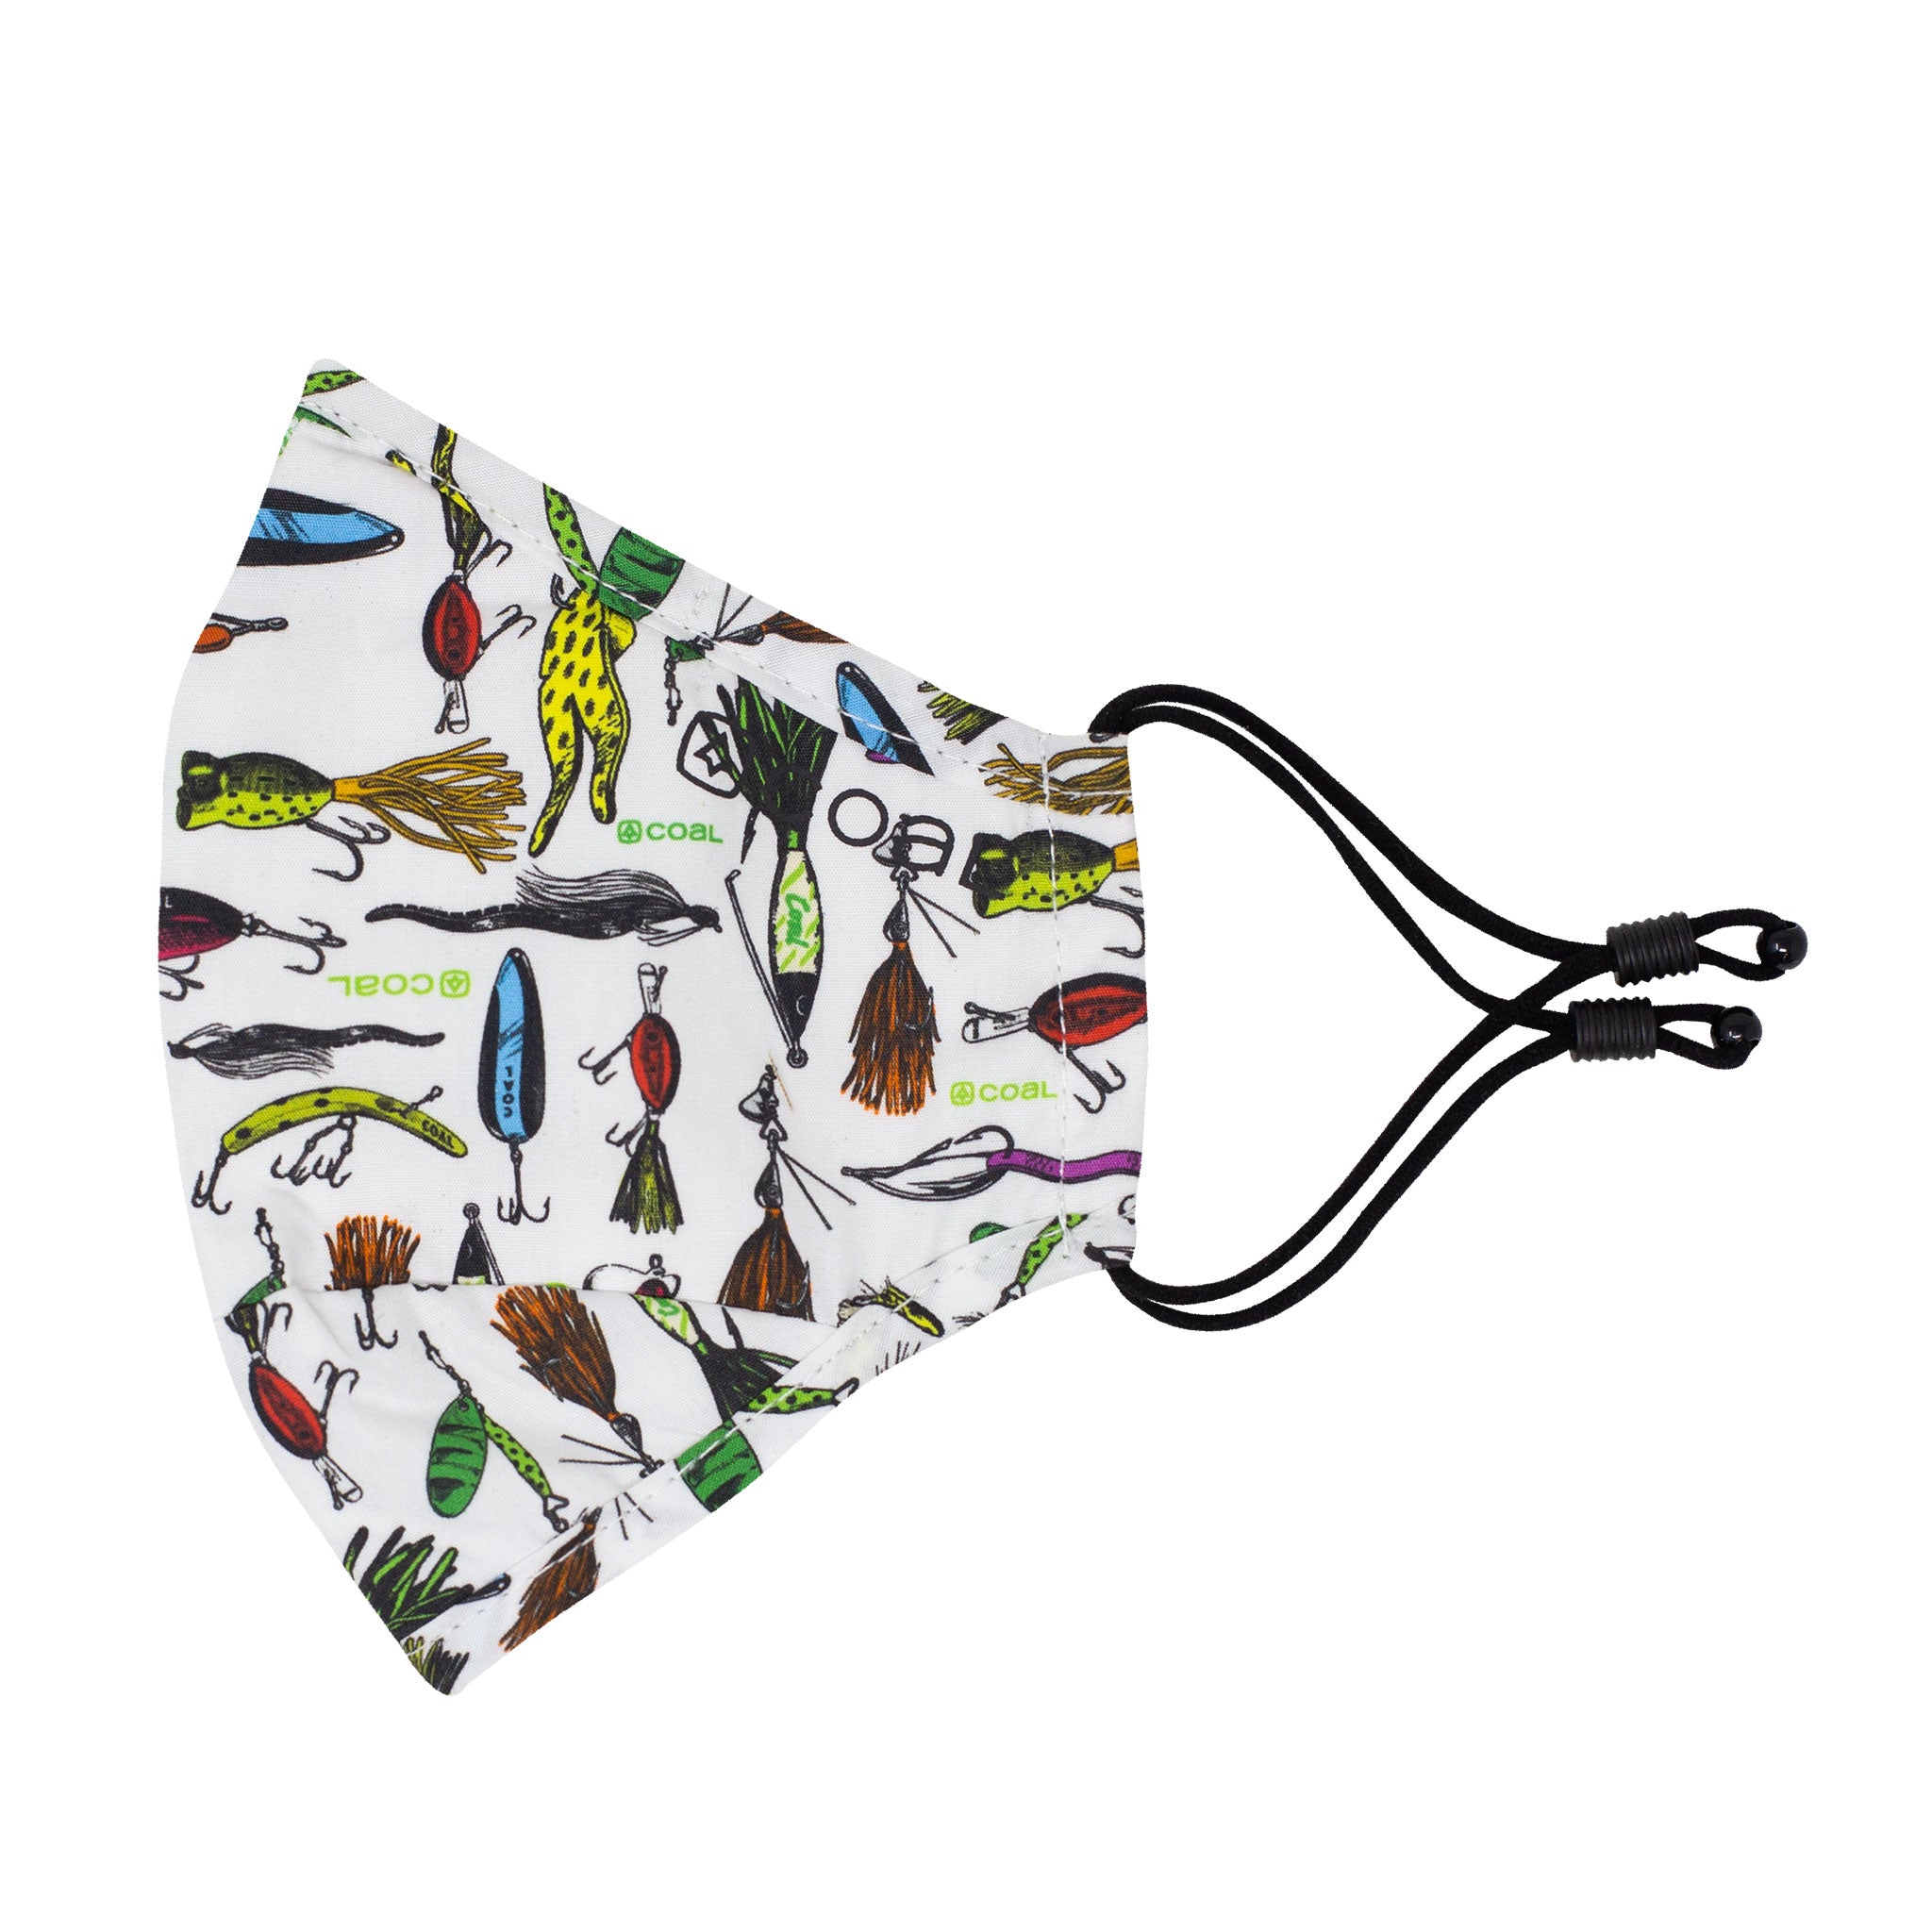 The Ergo Face Mask with Filter Pocket - Fishing Print, White Lure